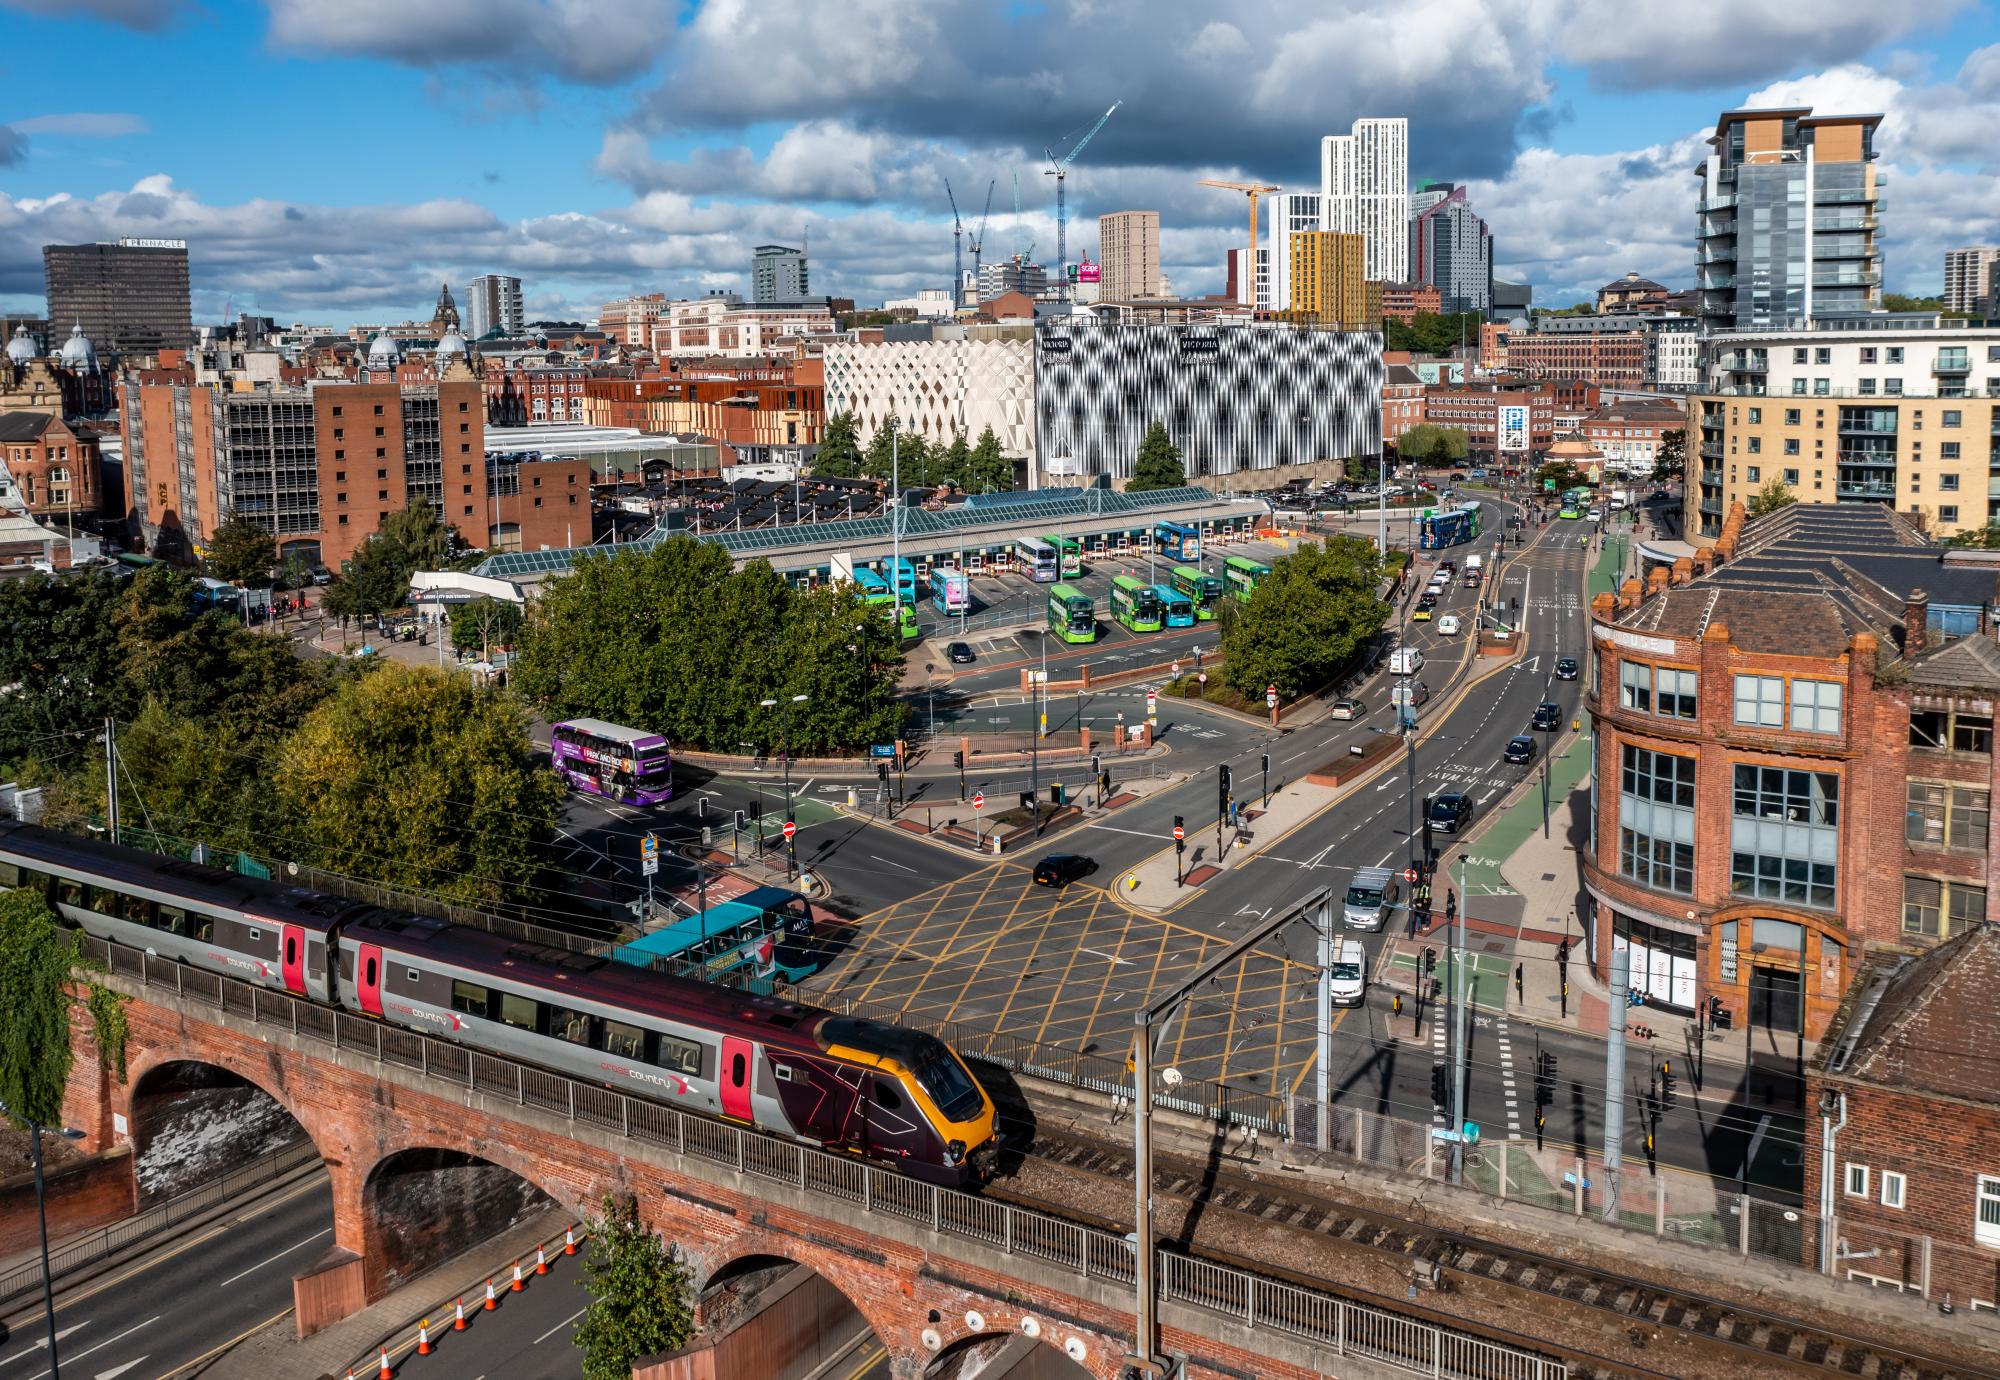 Aerial view of Leeds with train in foreground